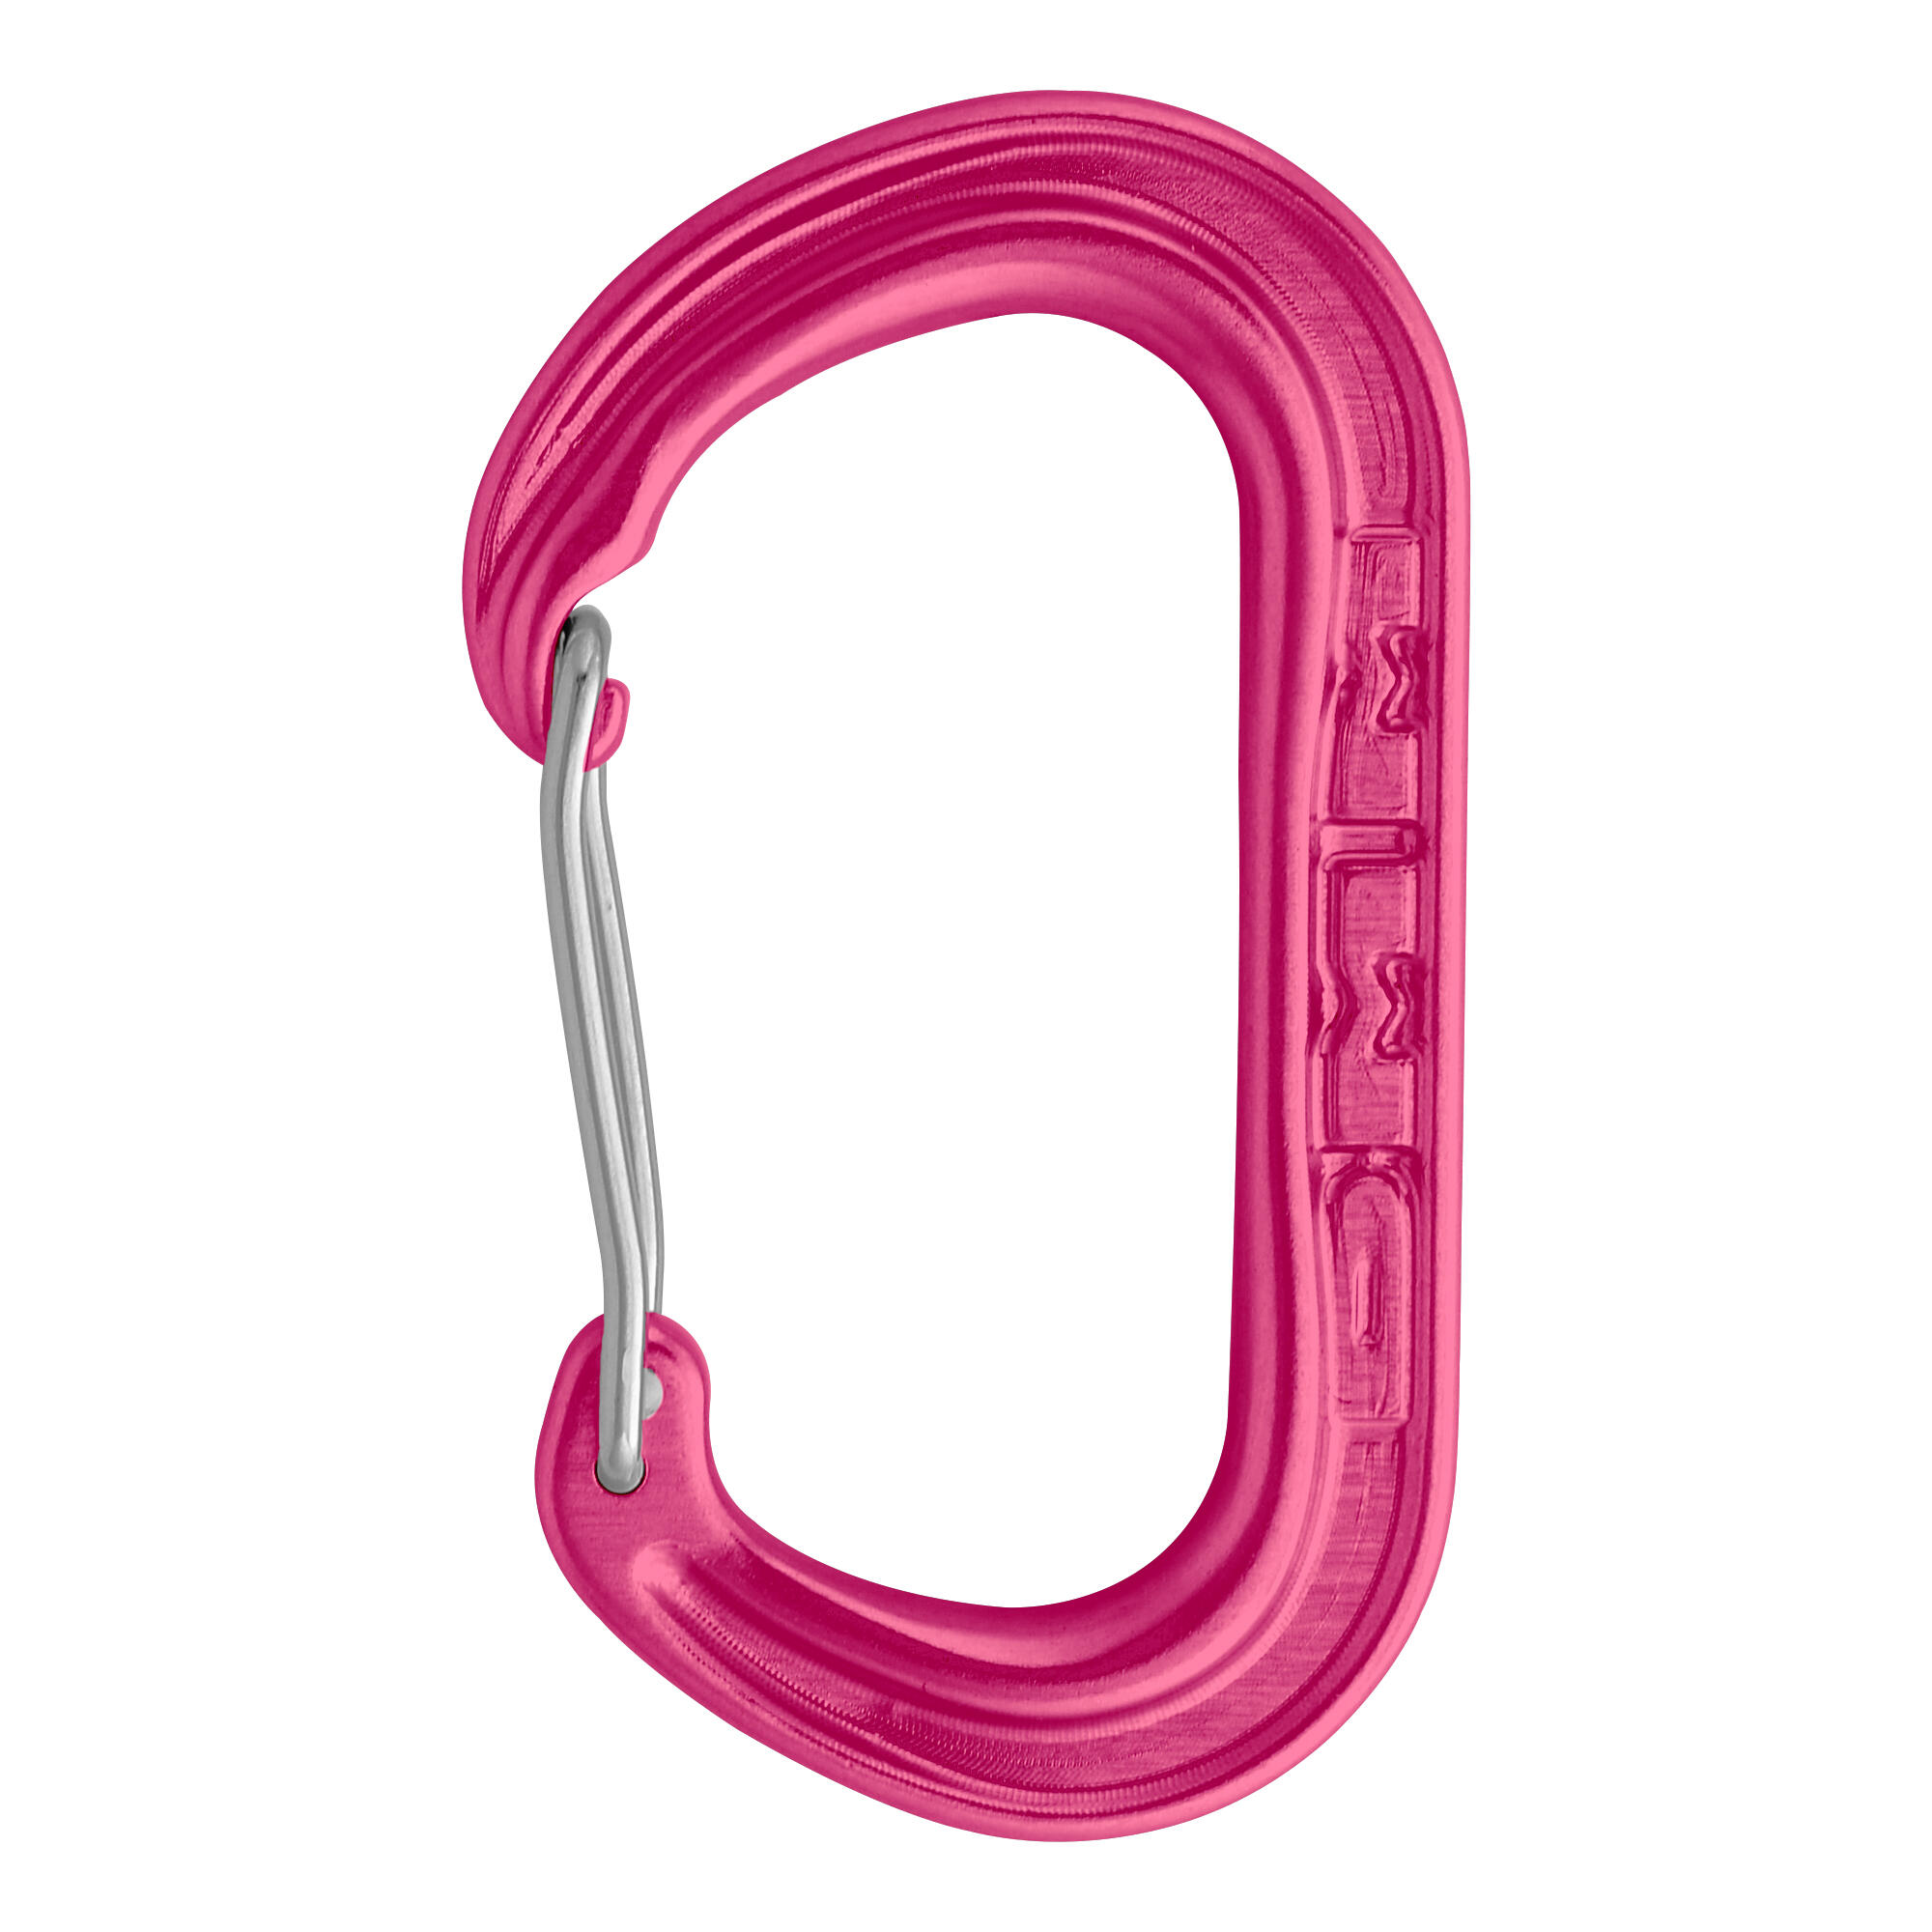 DMM XSRE Wire Accessory Carabiner - Pink